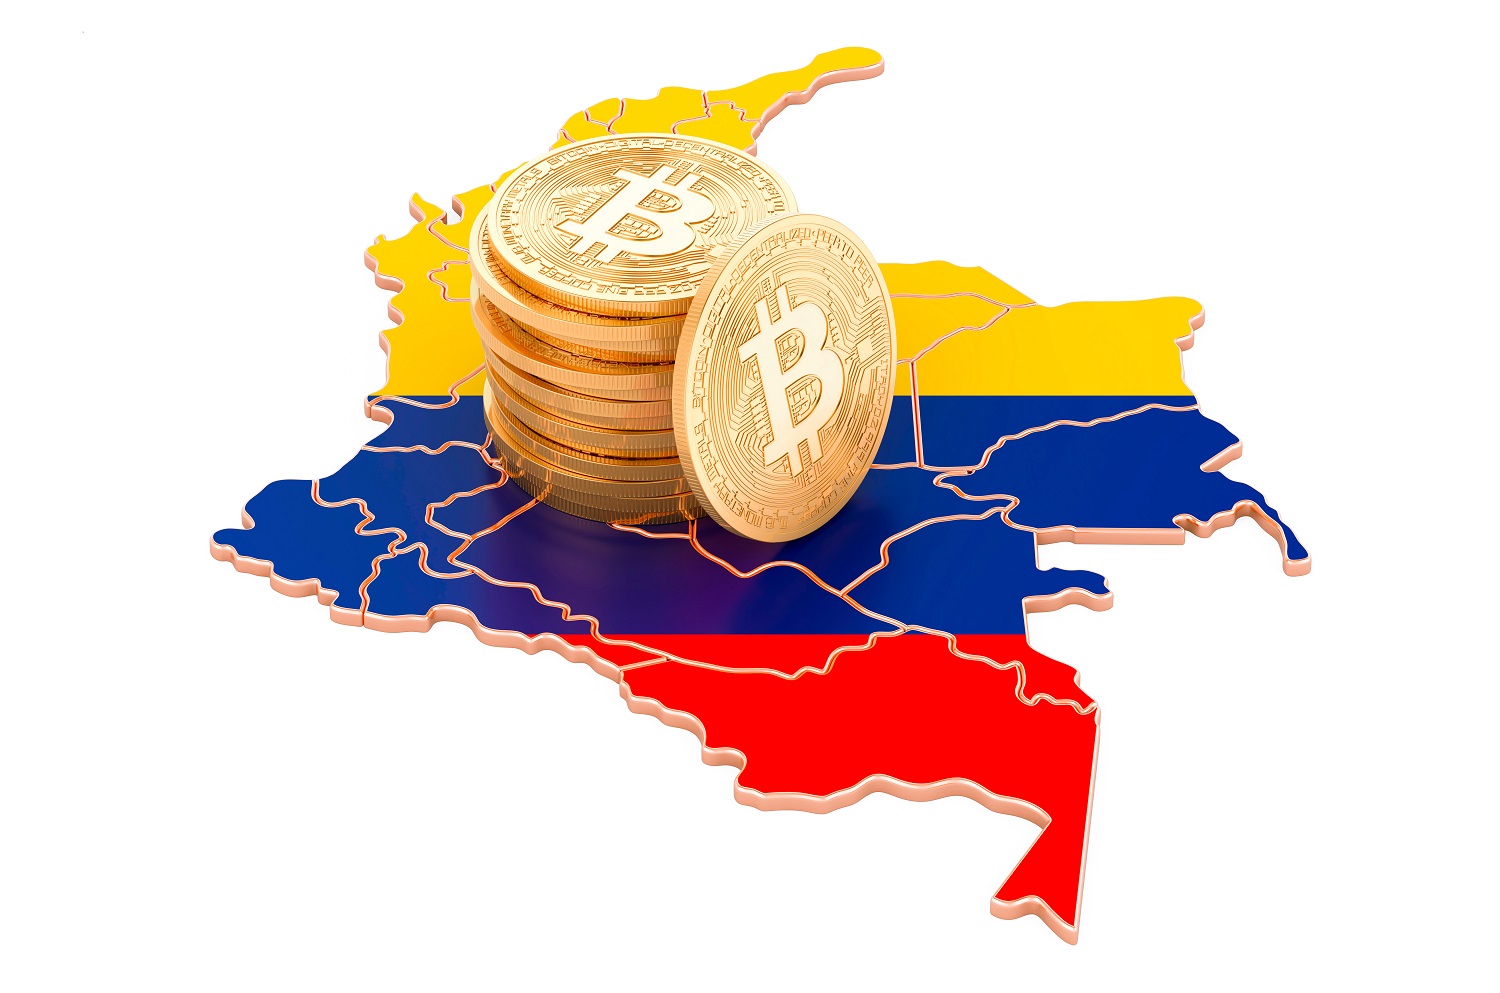 A pile of metal tokens intended to represent Bitcoin rests on a map of Colombia, decorated in the colors of the nation’s flag.